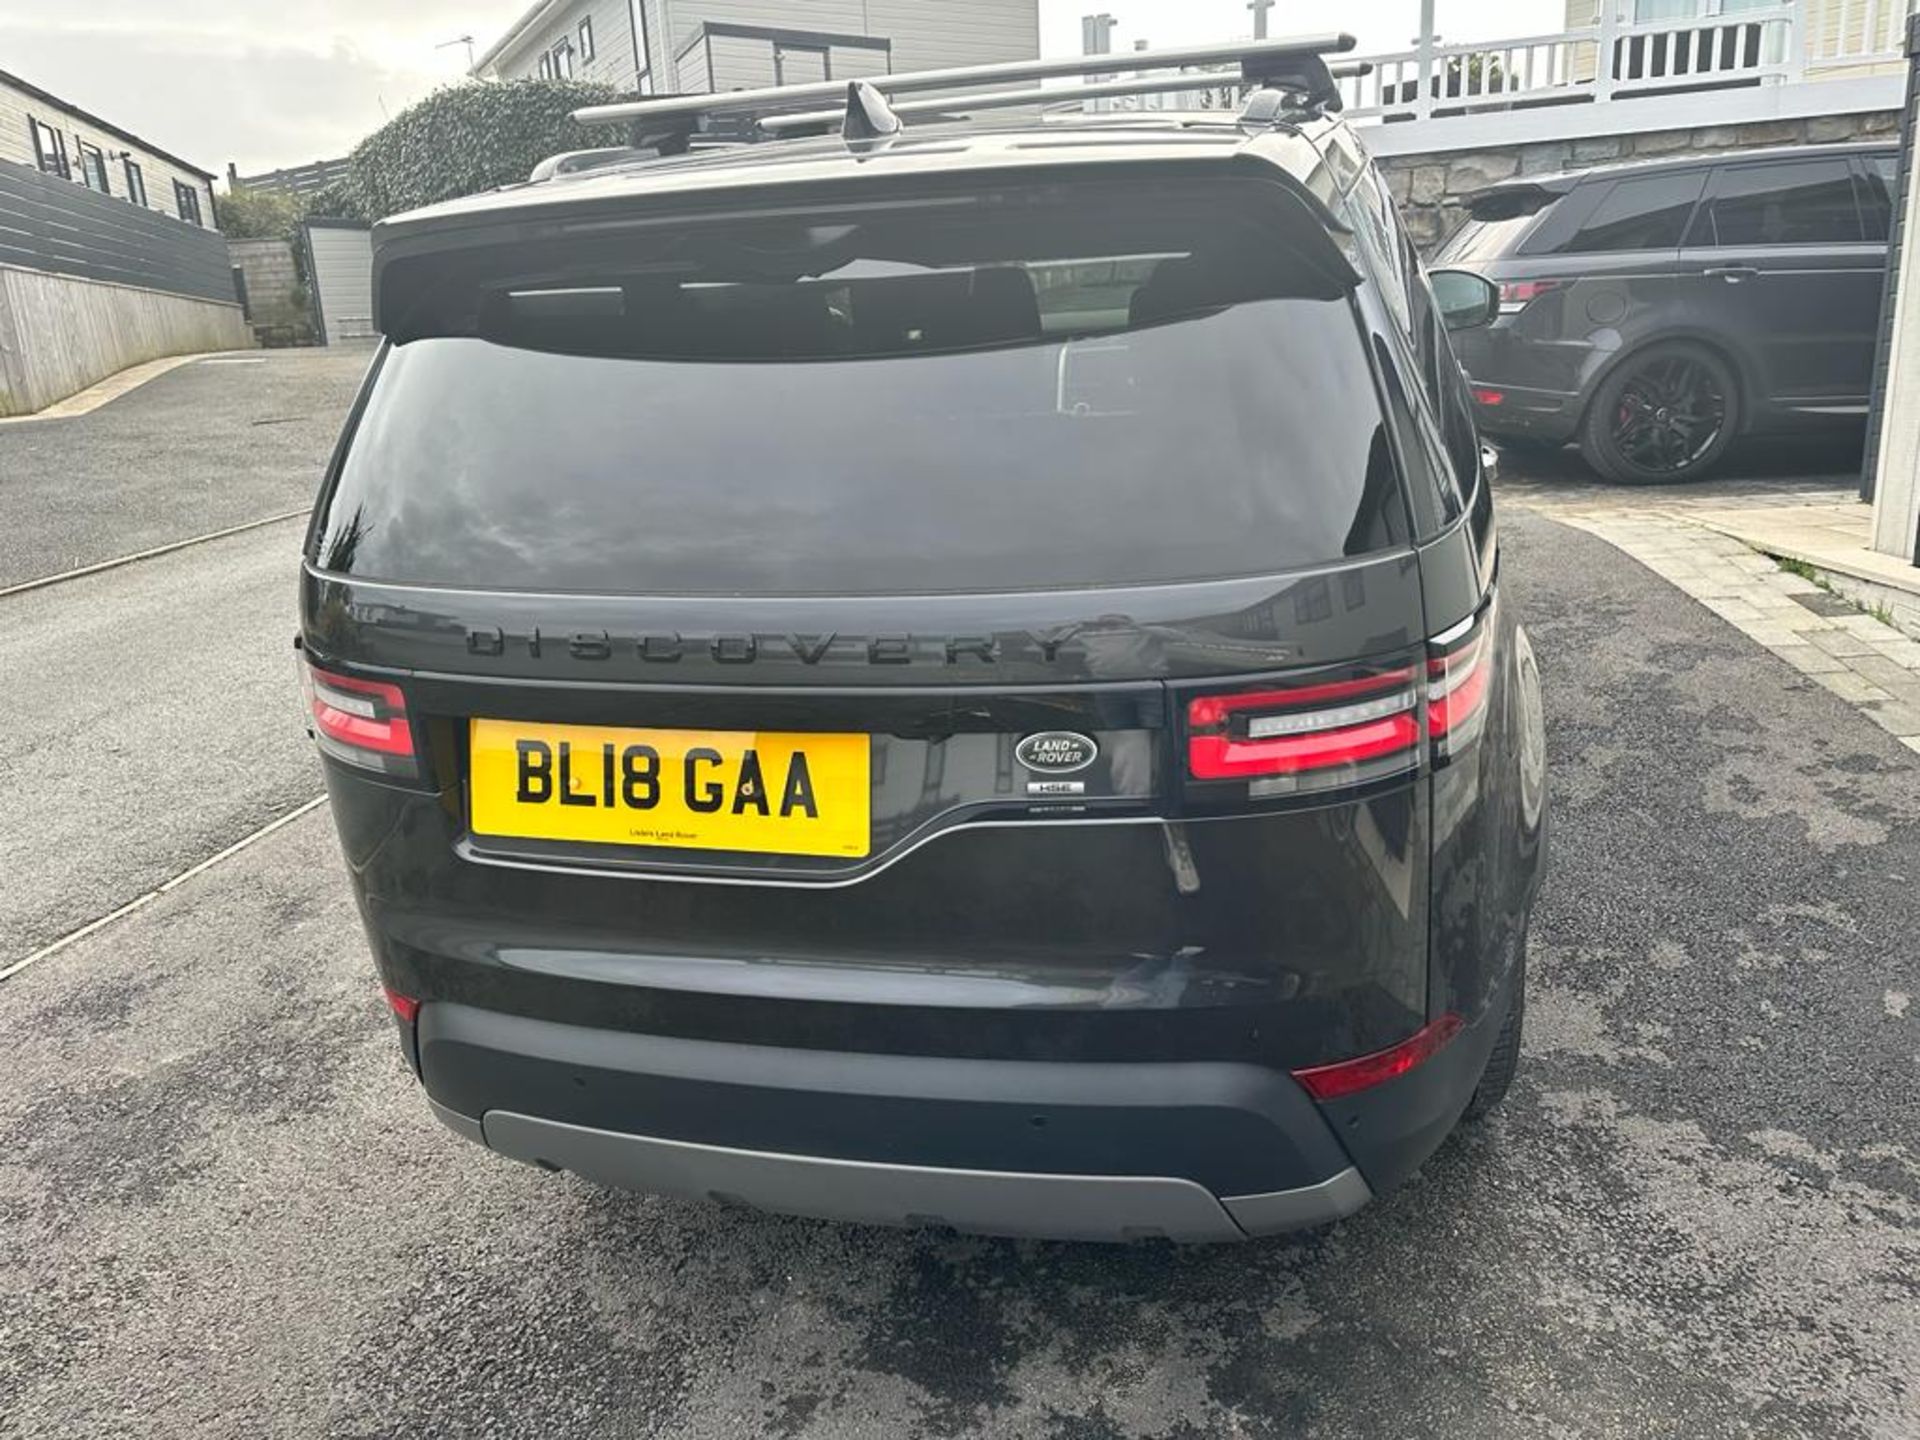 2018 LAND ROVER DISCOVERY HSE SD4 AUTO GREY SUV ESTATE *NO VAT* - Image 6 of 10